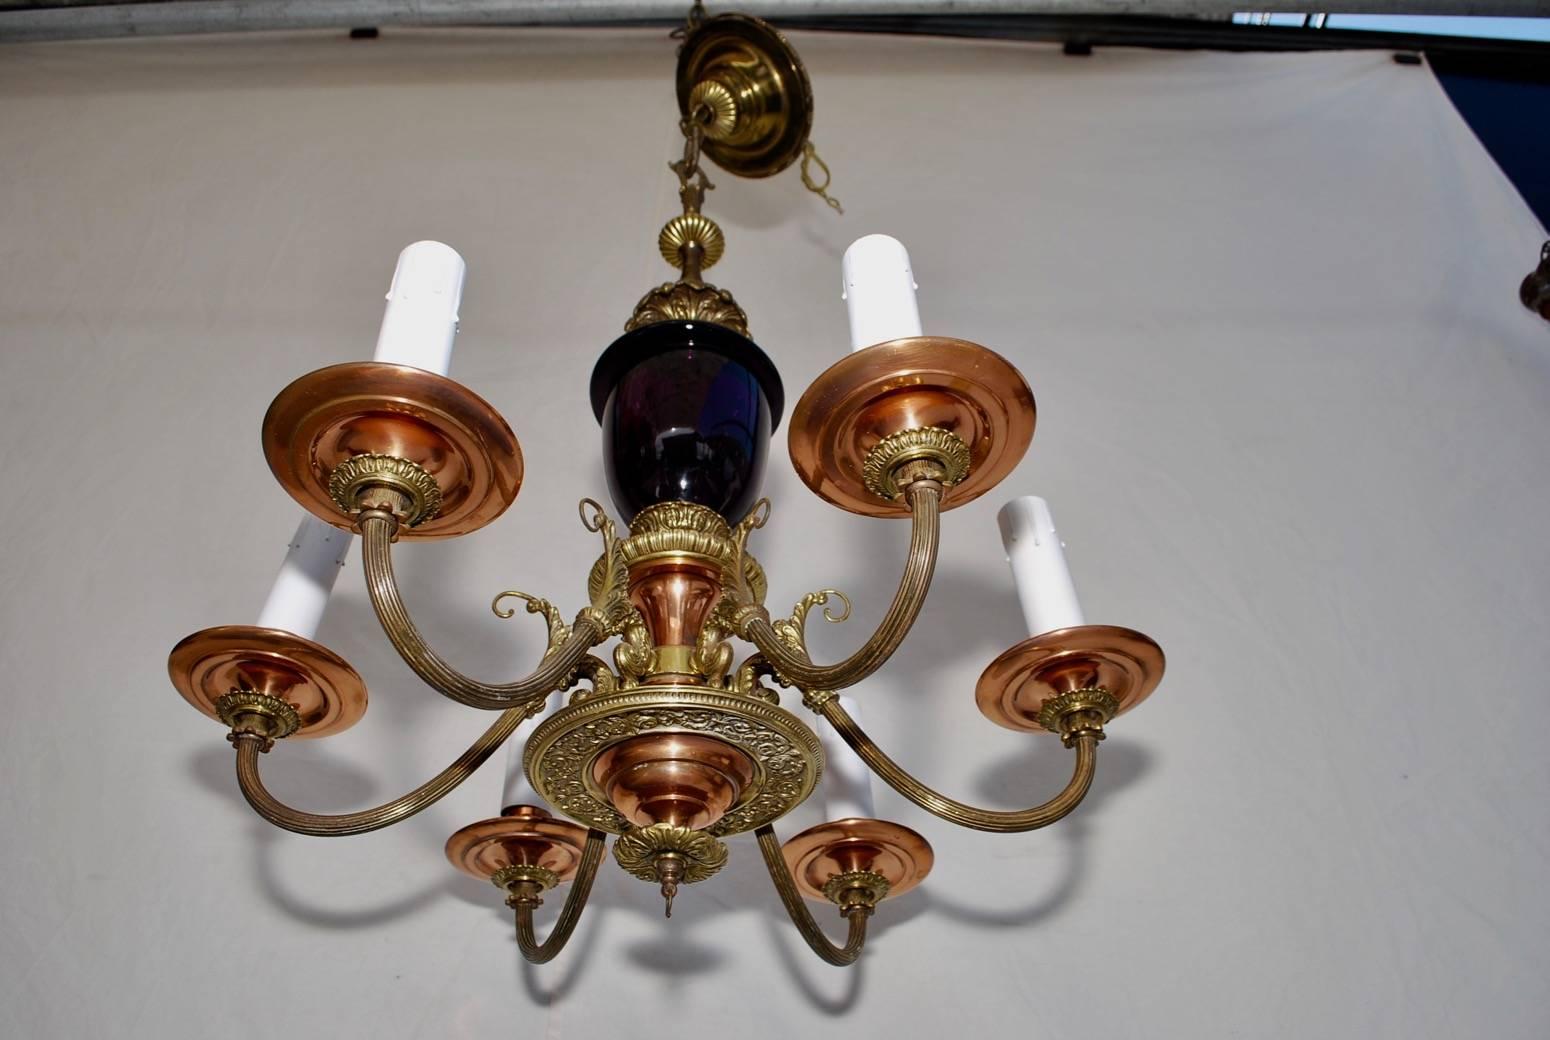 A beautiful 1930 chandelier, the purple glass look amazing when they is a window behind the chandelier.

     